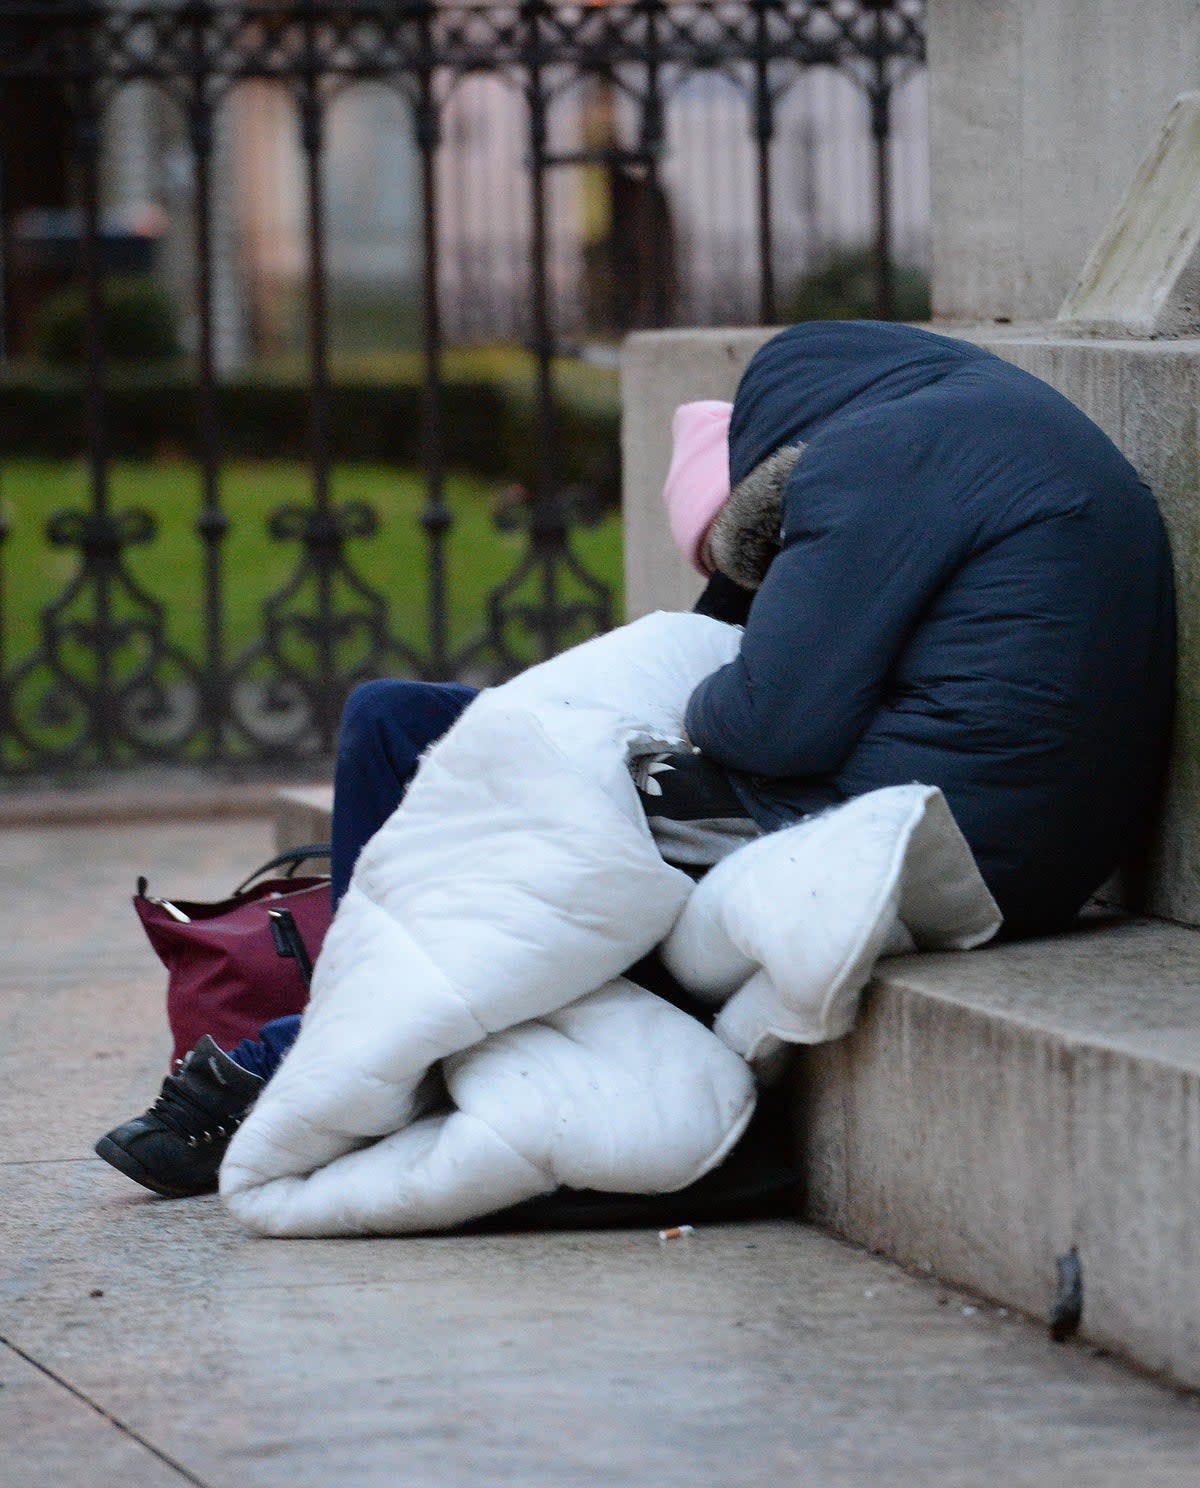 The Government said it remains ‘committed’ to its goal of ending rough sleeping (Nick Ansell/PA) (PA Archive)